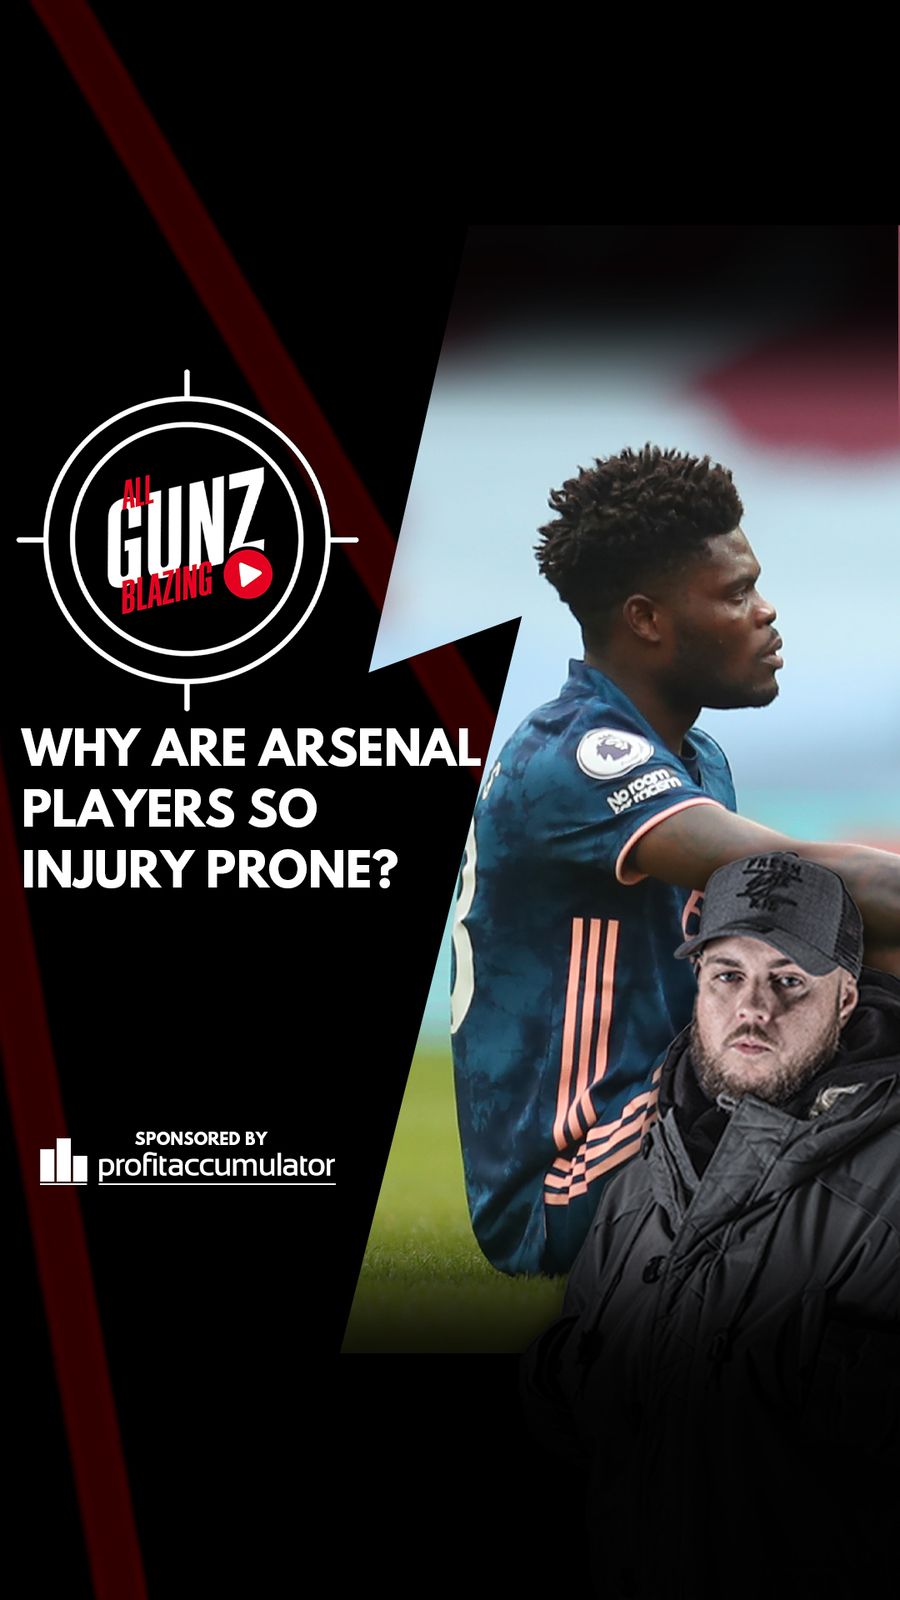 S3 Ep81: Why Are Arsenal Players So Injury Prone? | All Gunz Blazing Feat DT